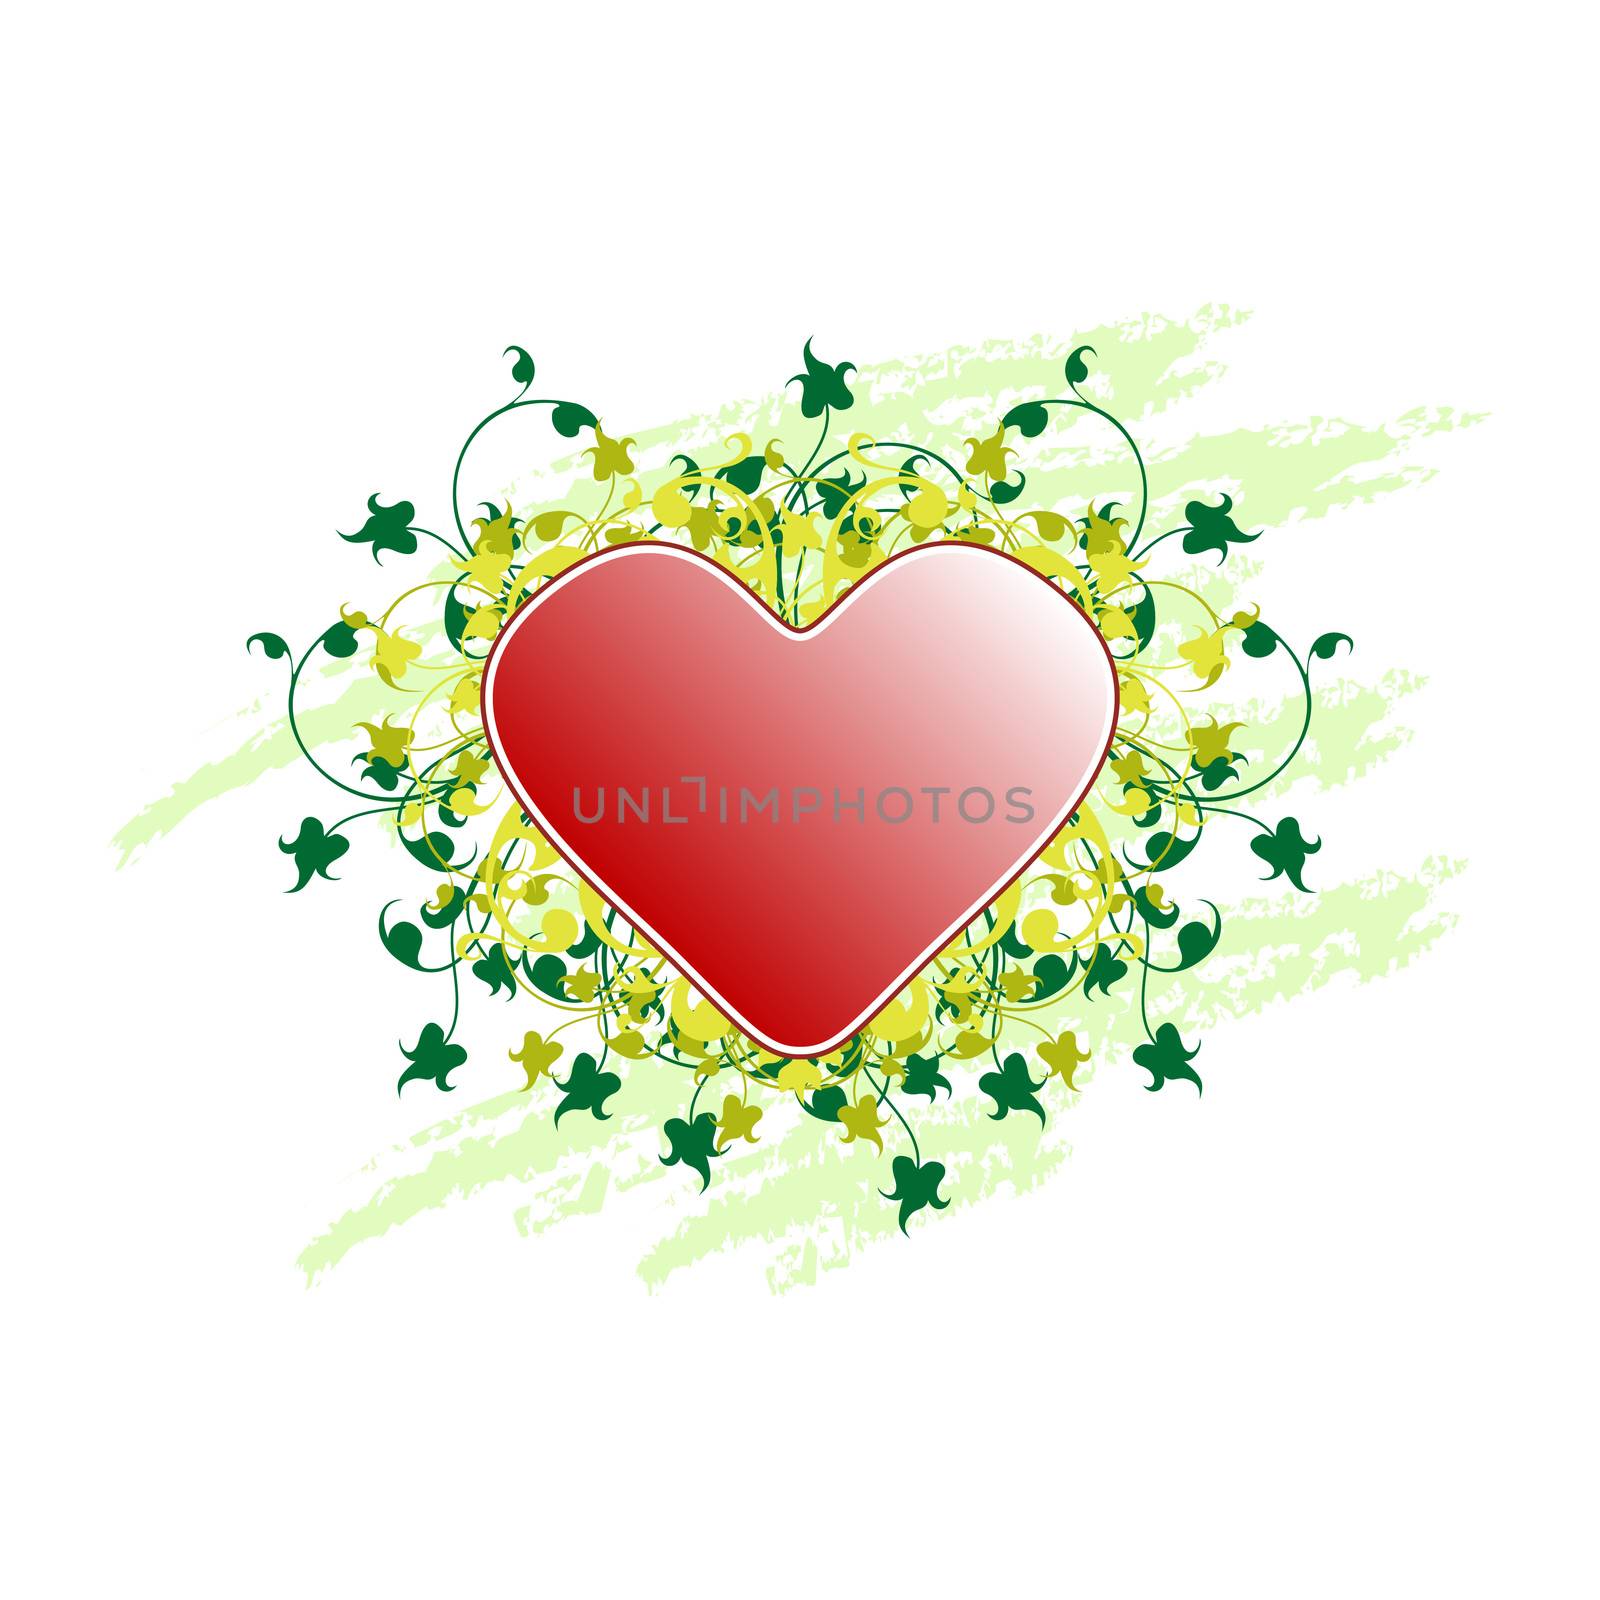 Valentine's Day greeting card with flowers and heart on grunge background